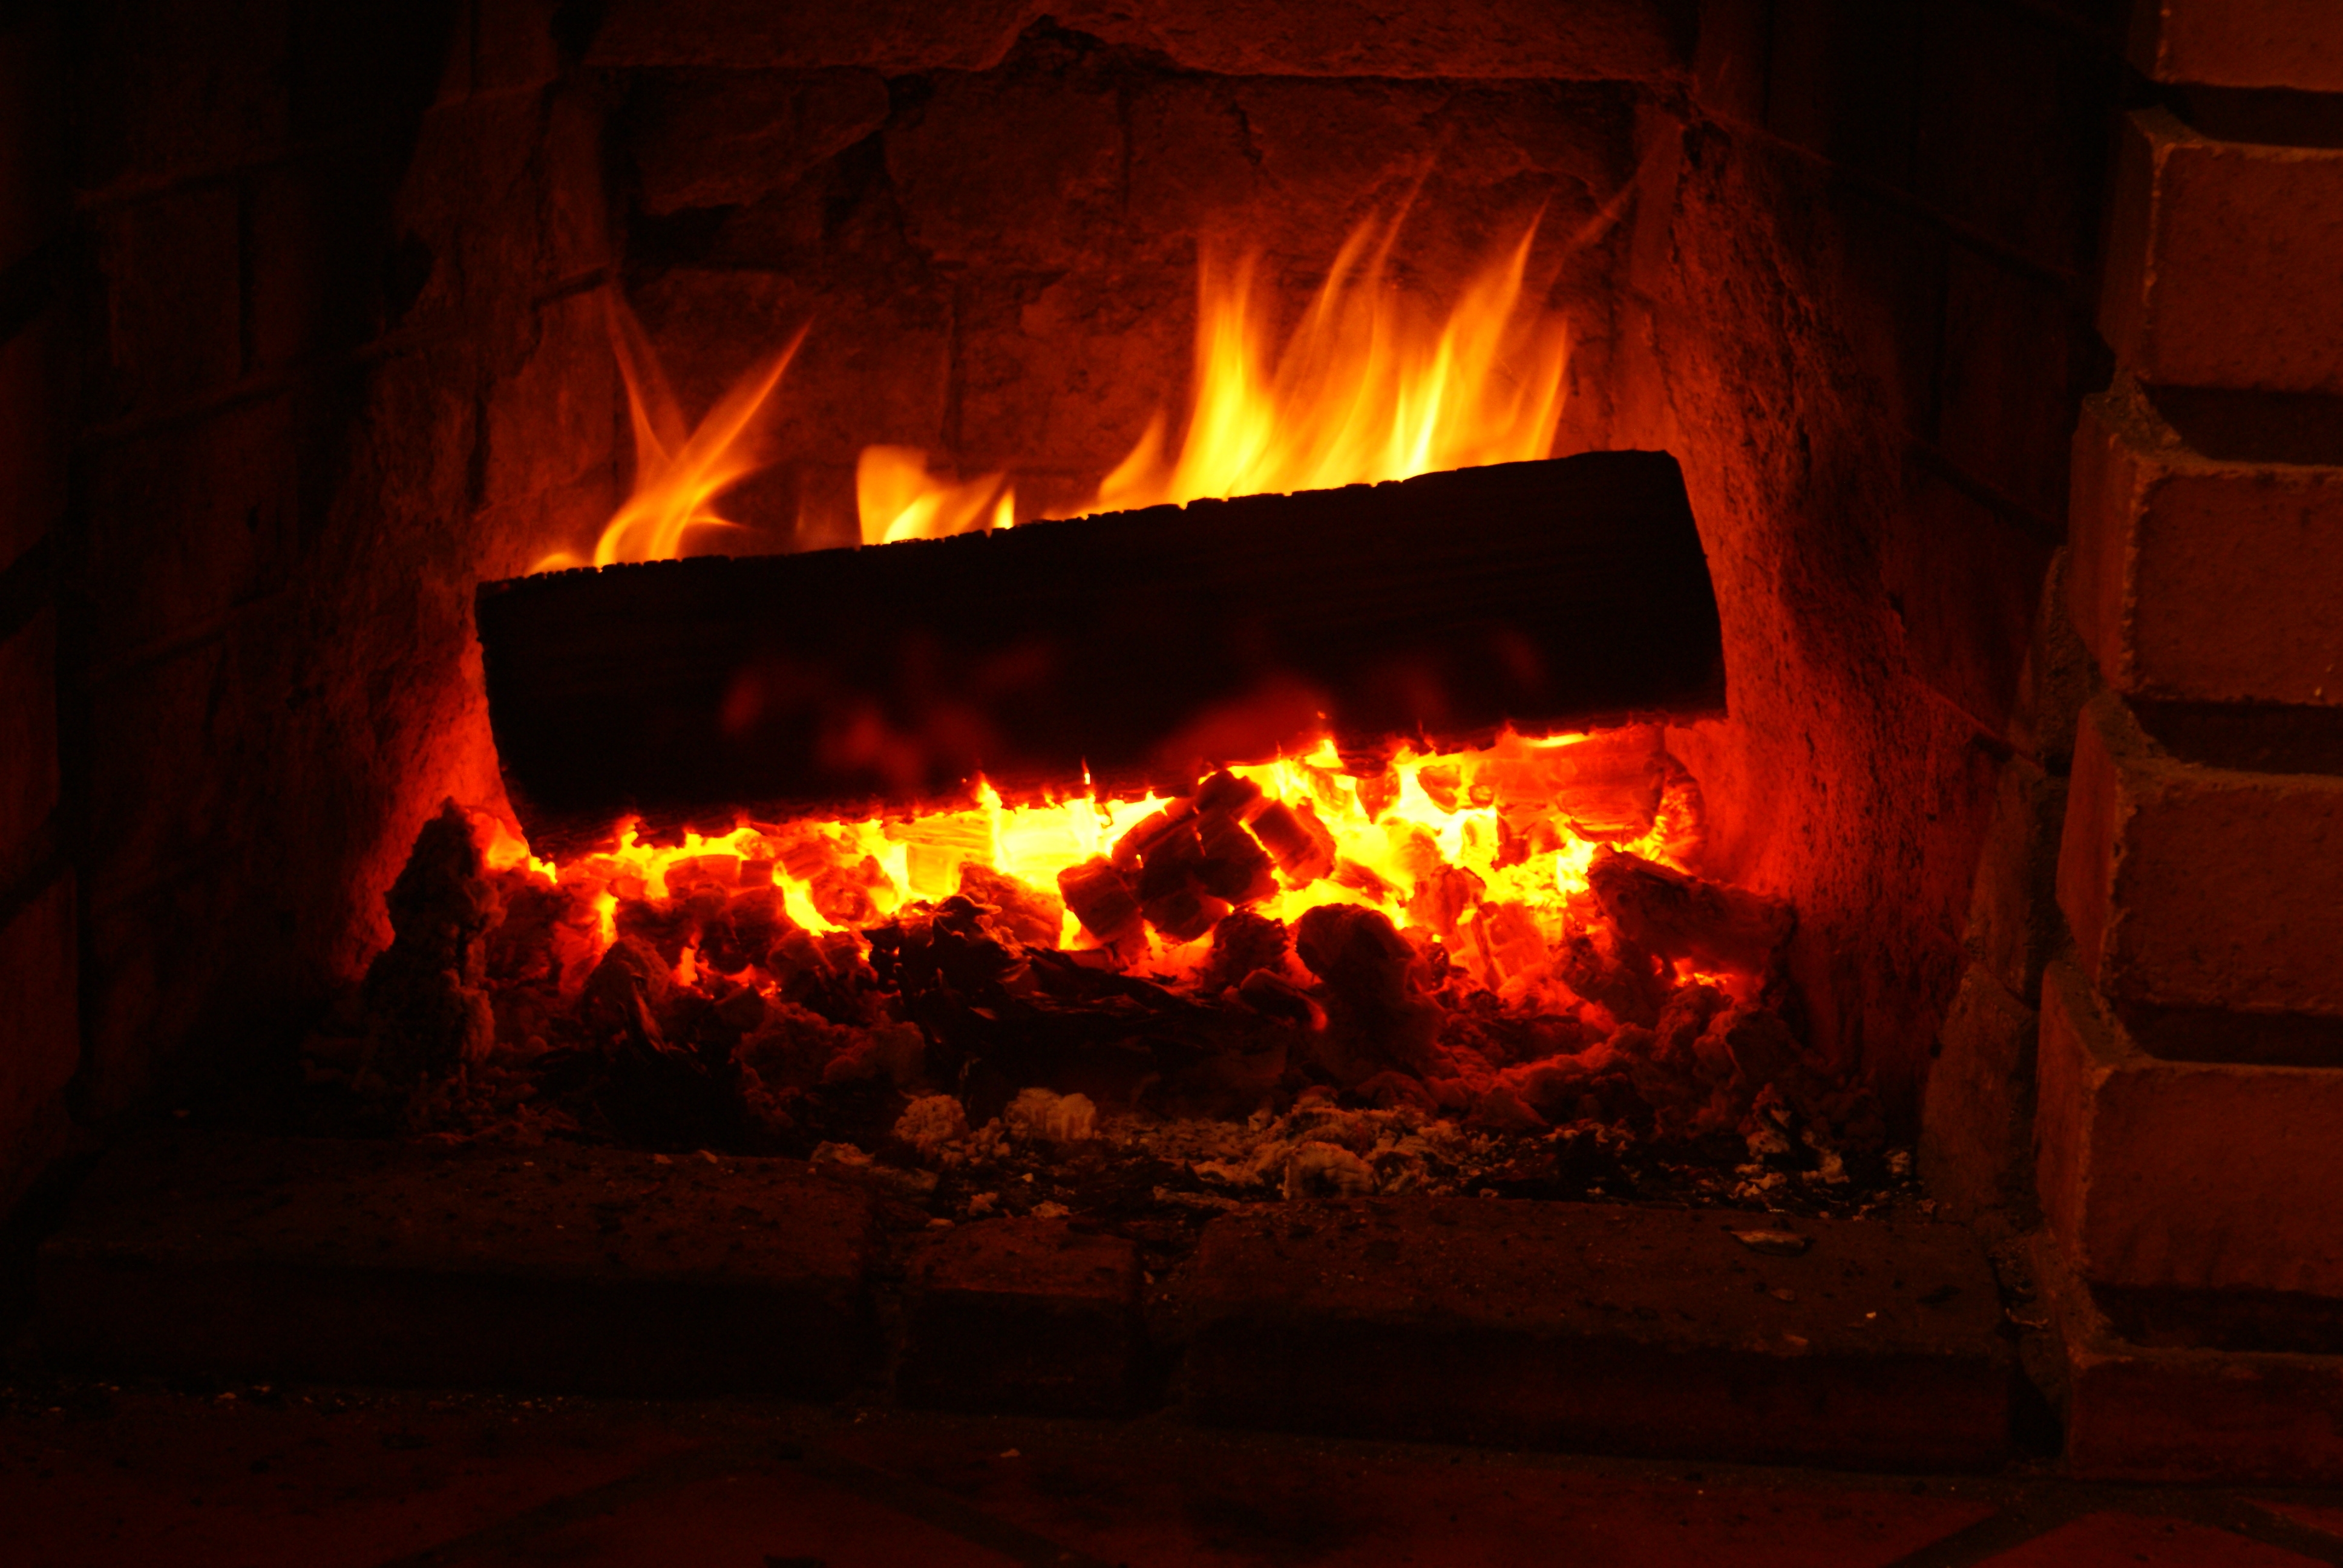 105479 Screensavers and Wallpapers Coals for phone. Download fire, coals, dark, firewood, fireplace, embers pictures for free